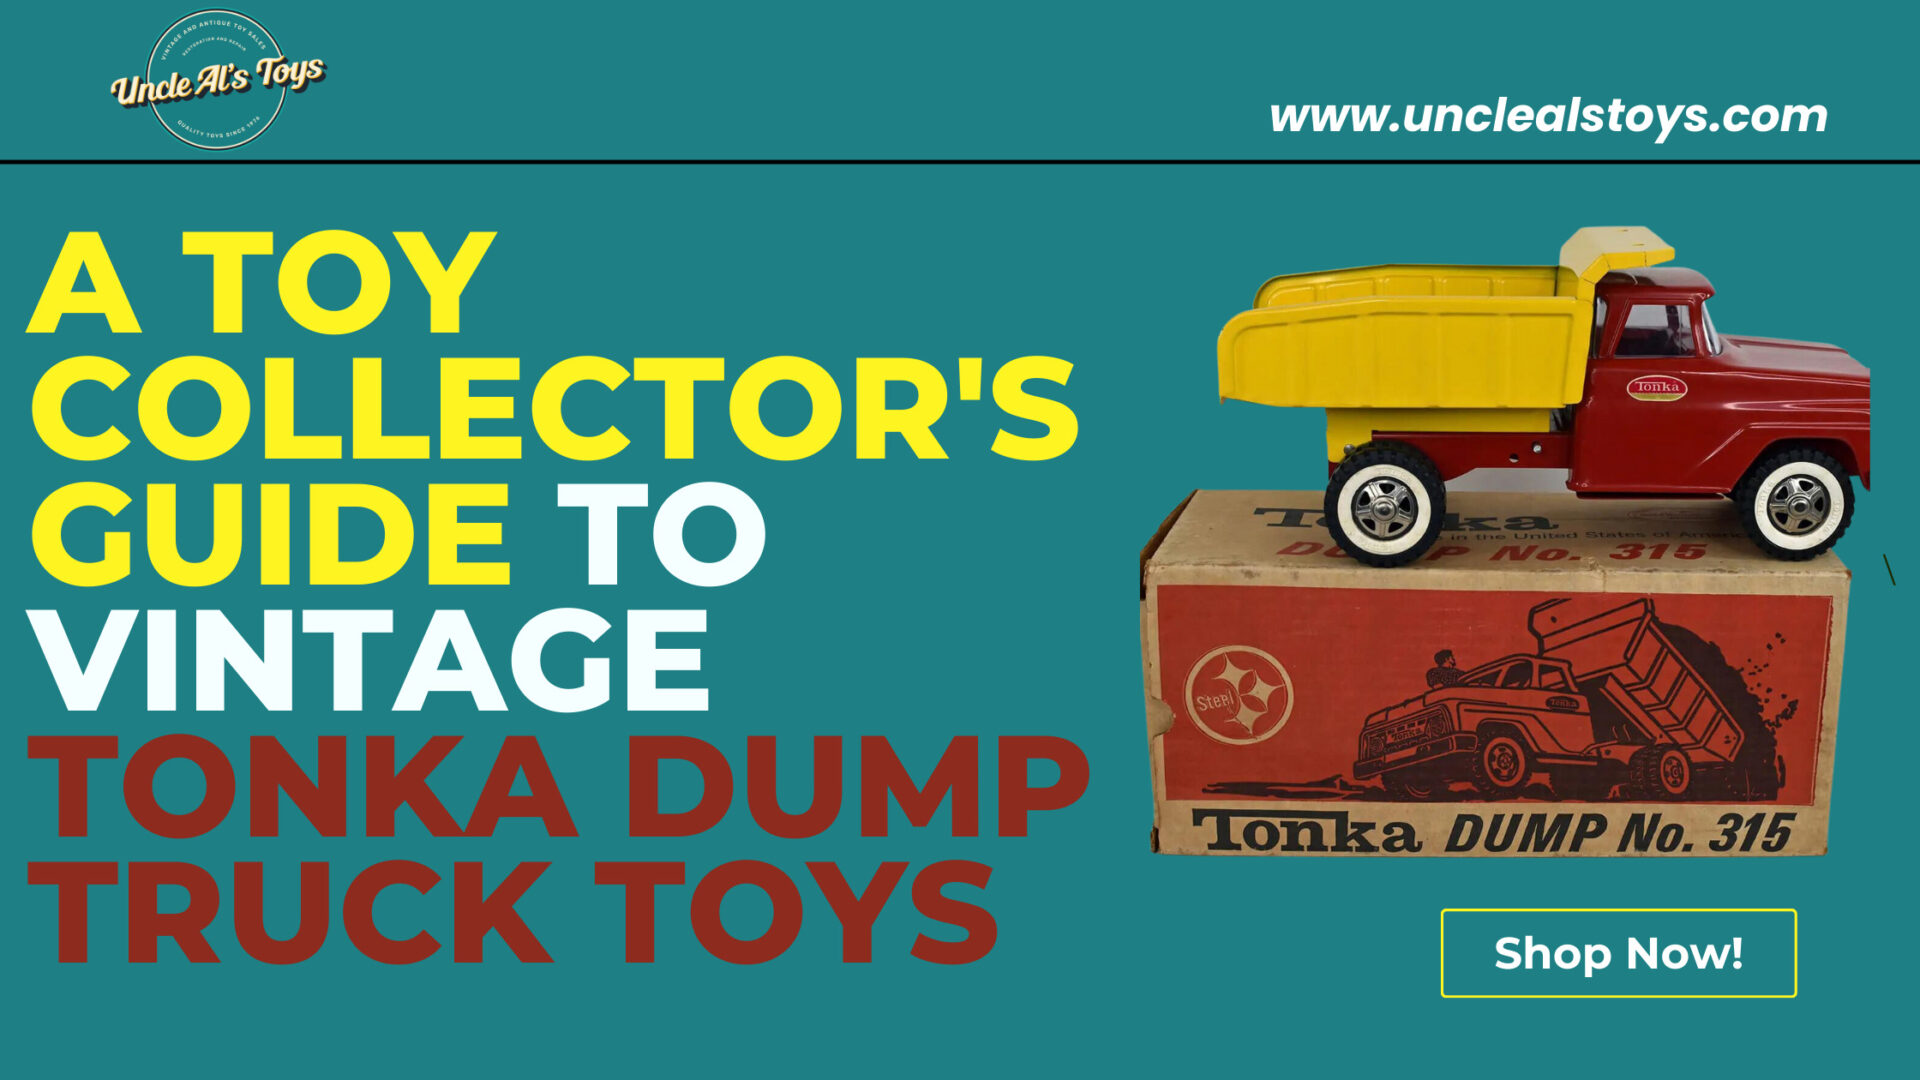 A Toy Collector's Guide to Vintage Tonka Dump Truck Toys